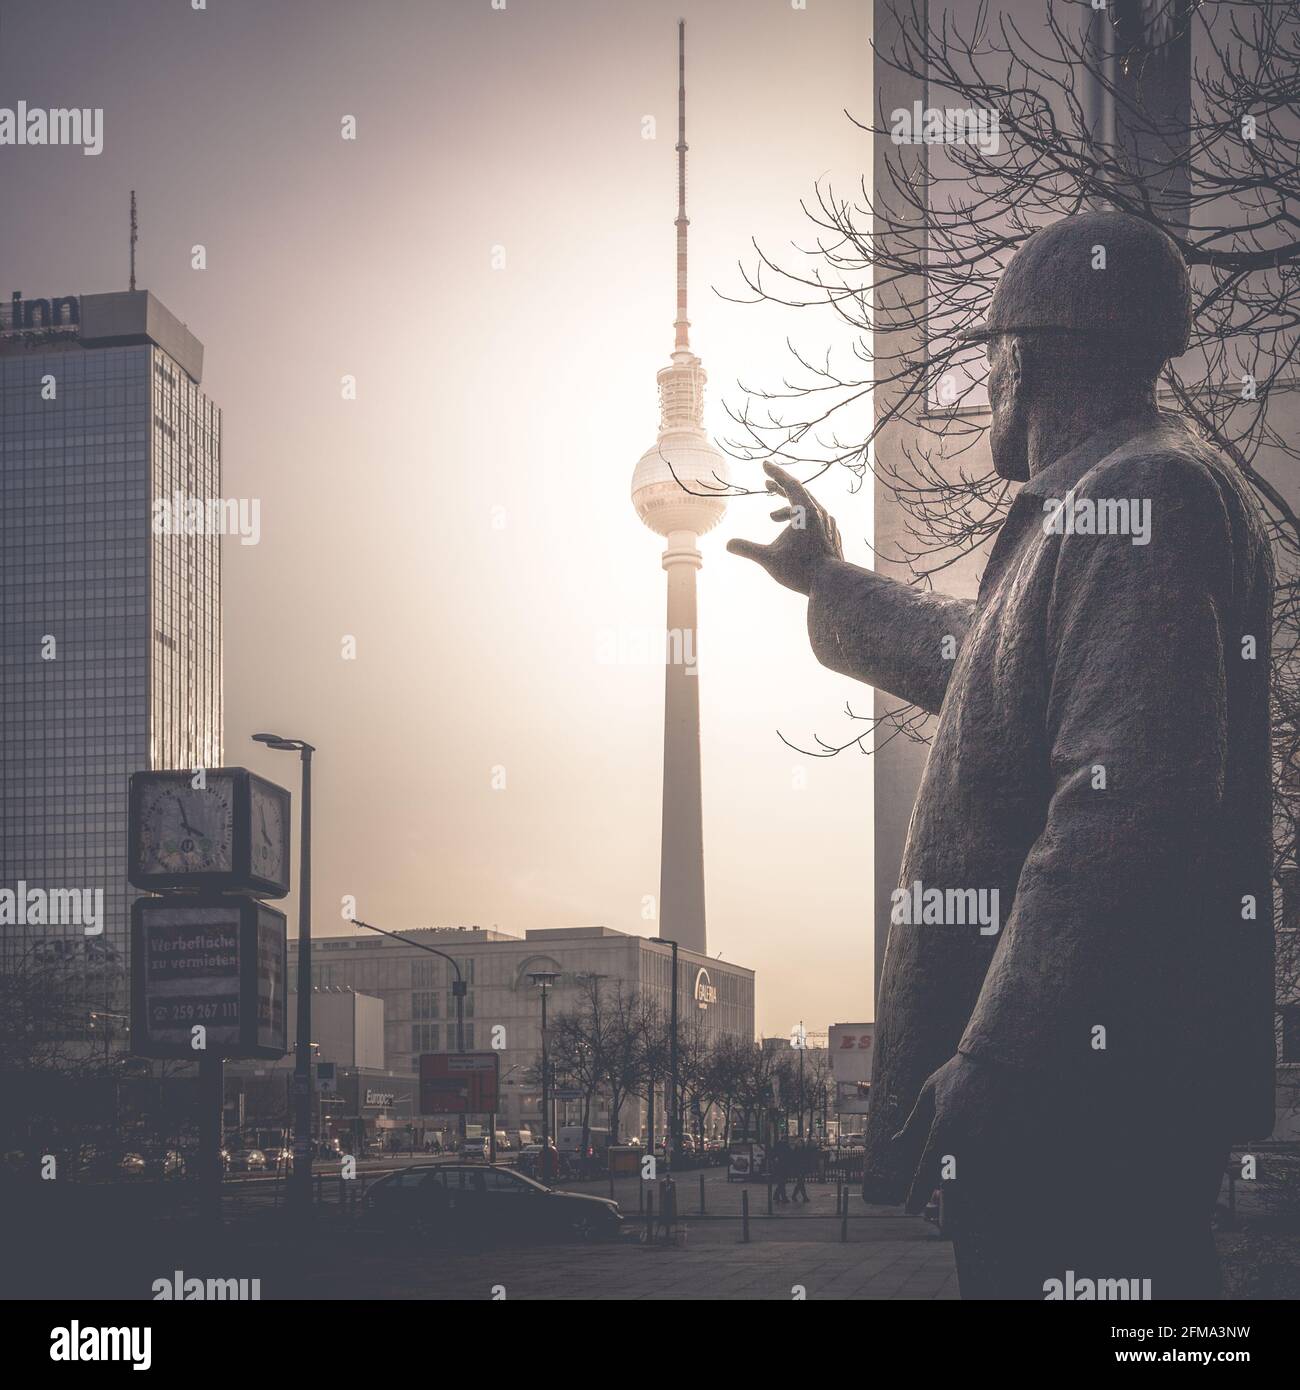 Sunset behind the television tower on Berlin's Alexanderplatz with a historical statue in the foreground. Stock Photo